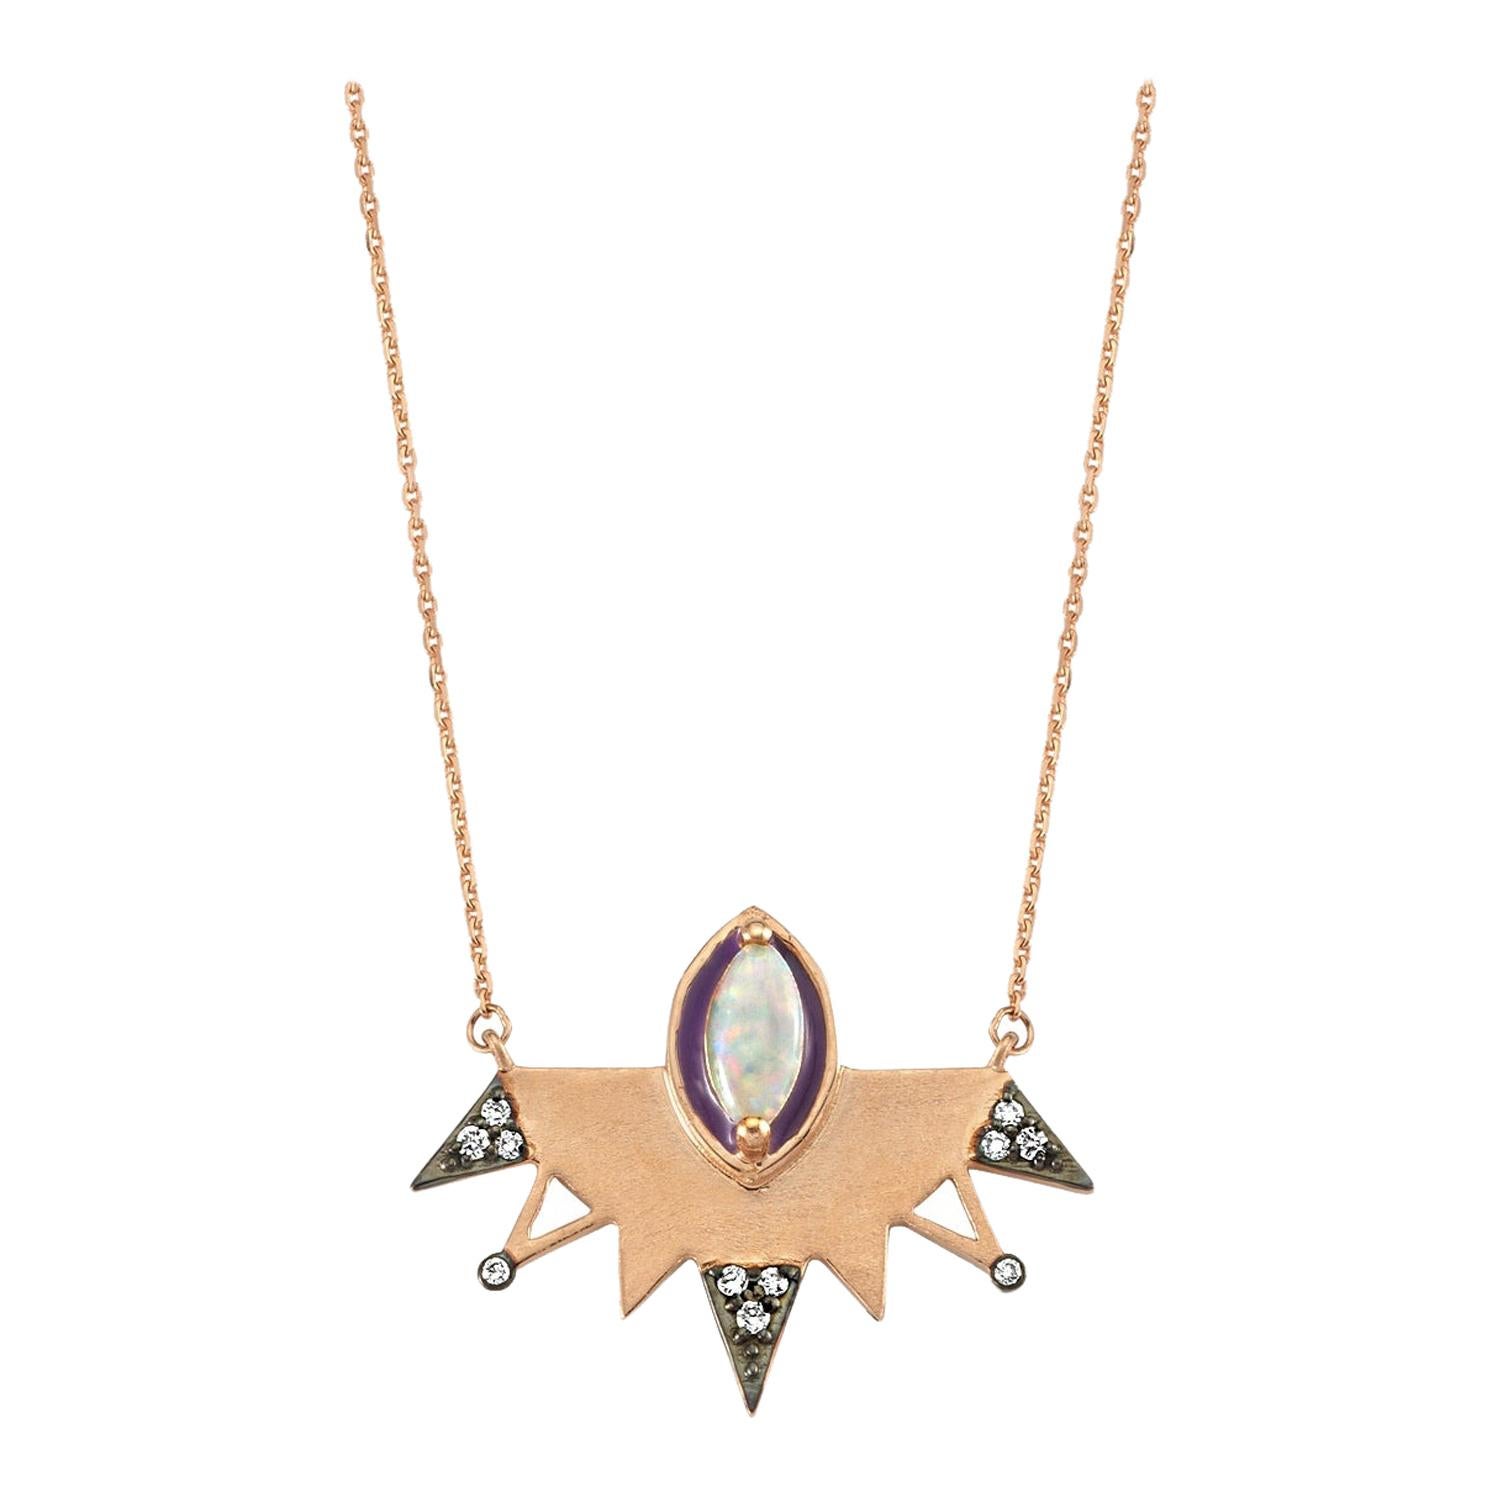 Aisa White Opal Necklace in 14 Karat Rose Gold with White Diamond For Sale